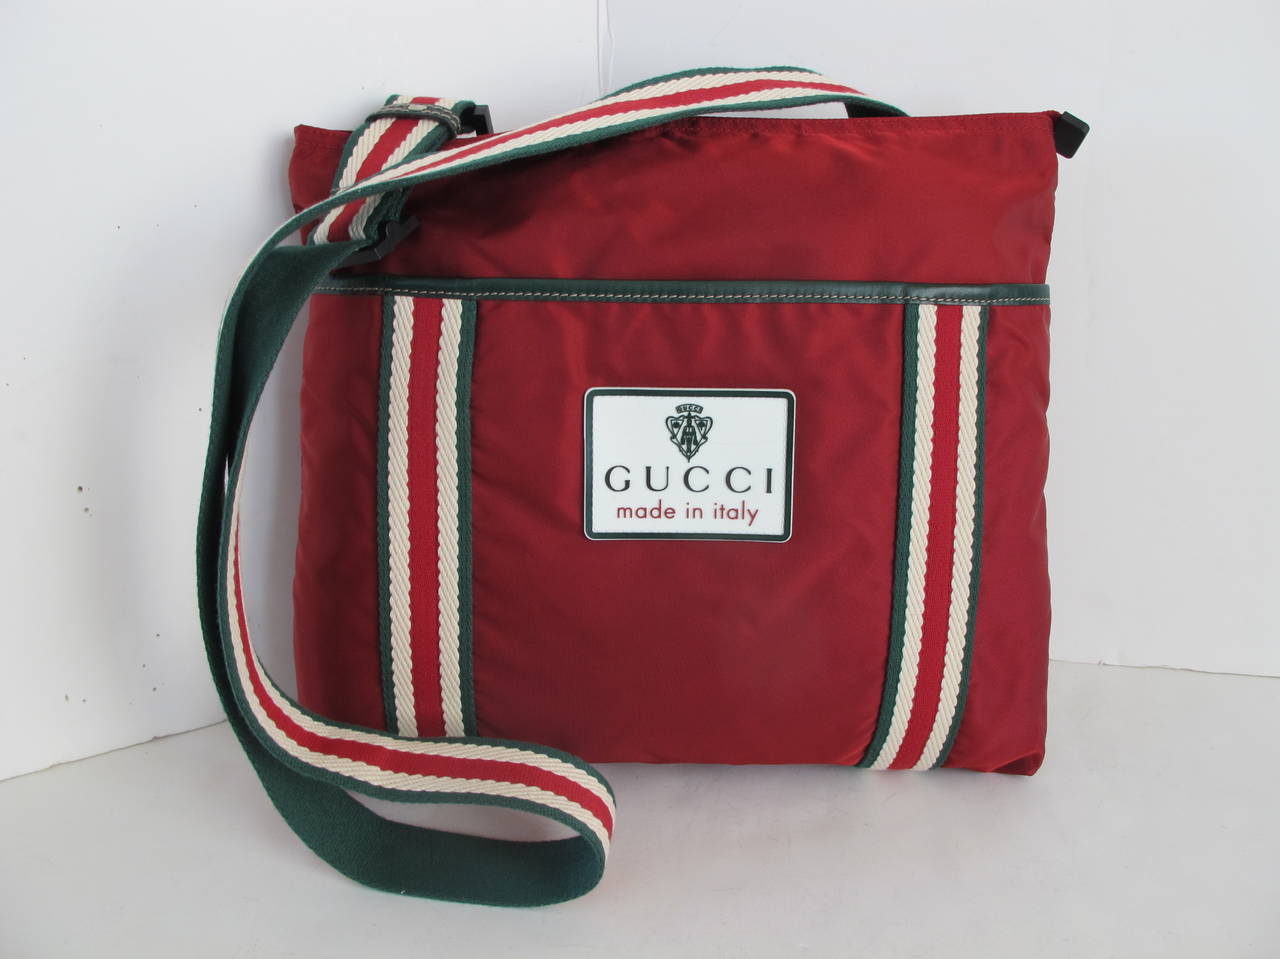 The rare 1970's Gucci Cross-bag was donated to Helpers. The vintage maroon bag has Gucci's signature hunter green, maroon and cream adjustable strap.

The original tags are safely put in pocket within bag. It has 2 pockets inside bag. Shoulder